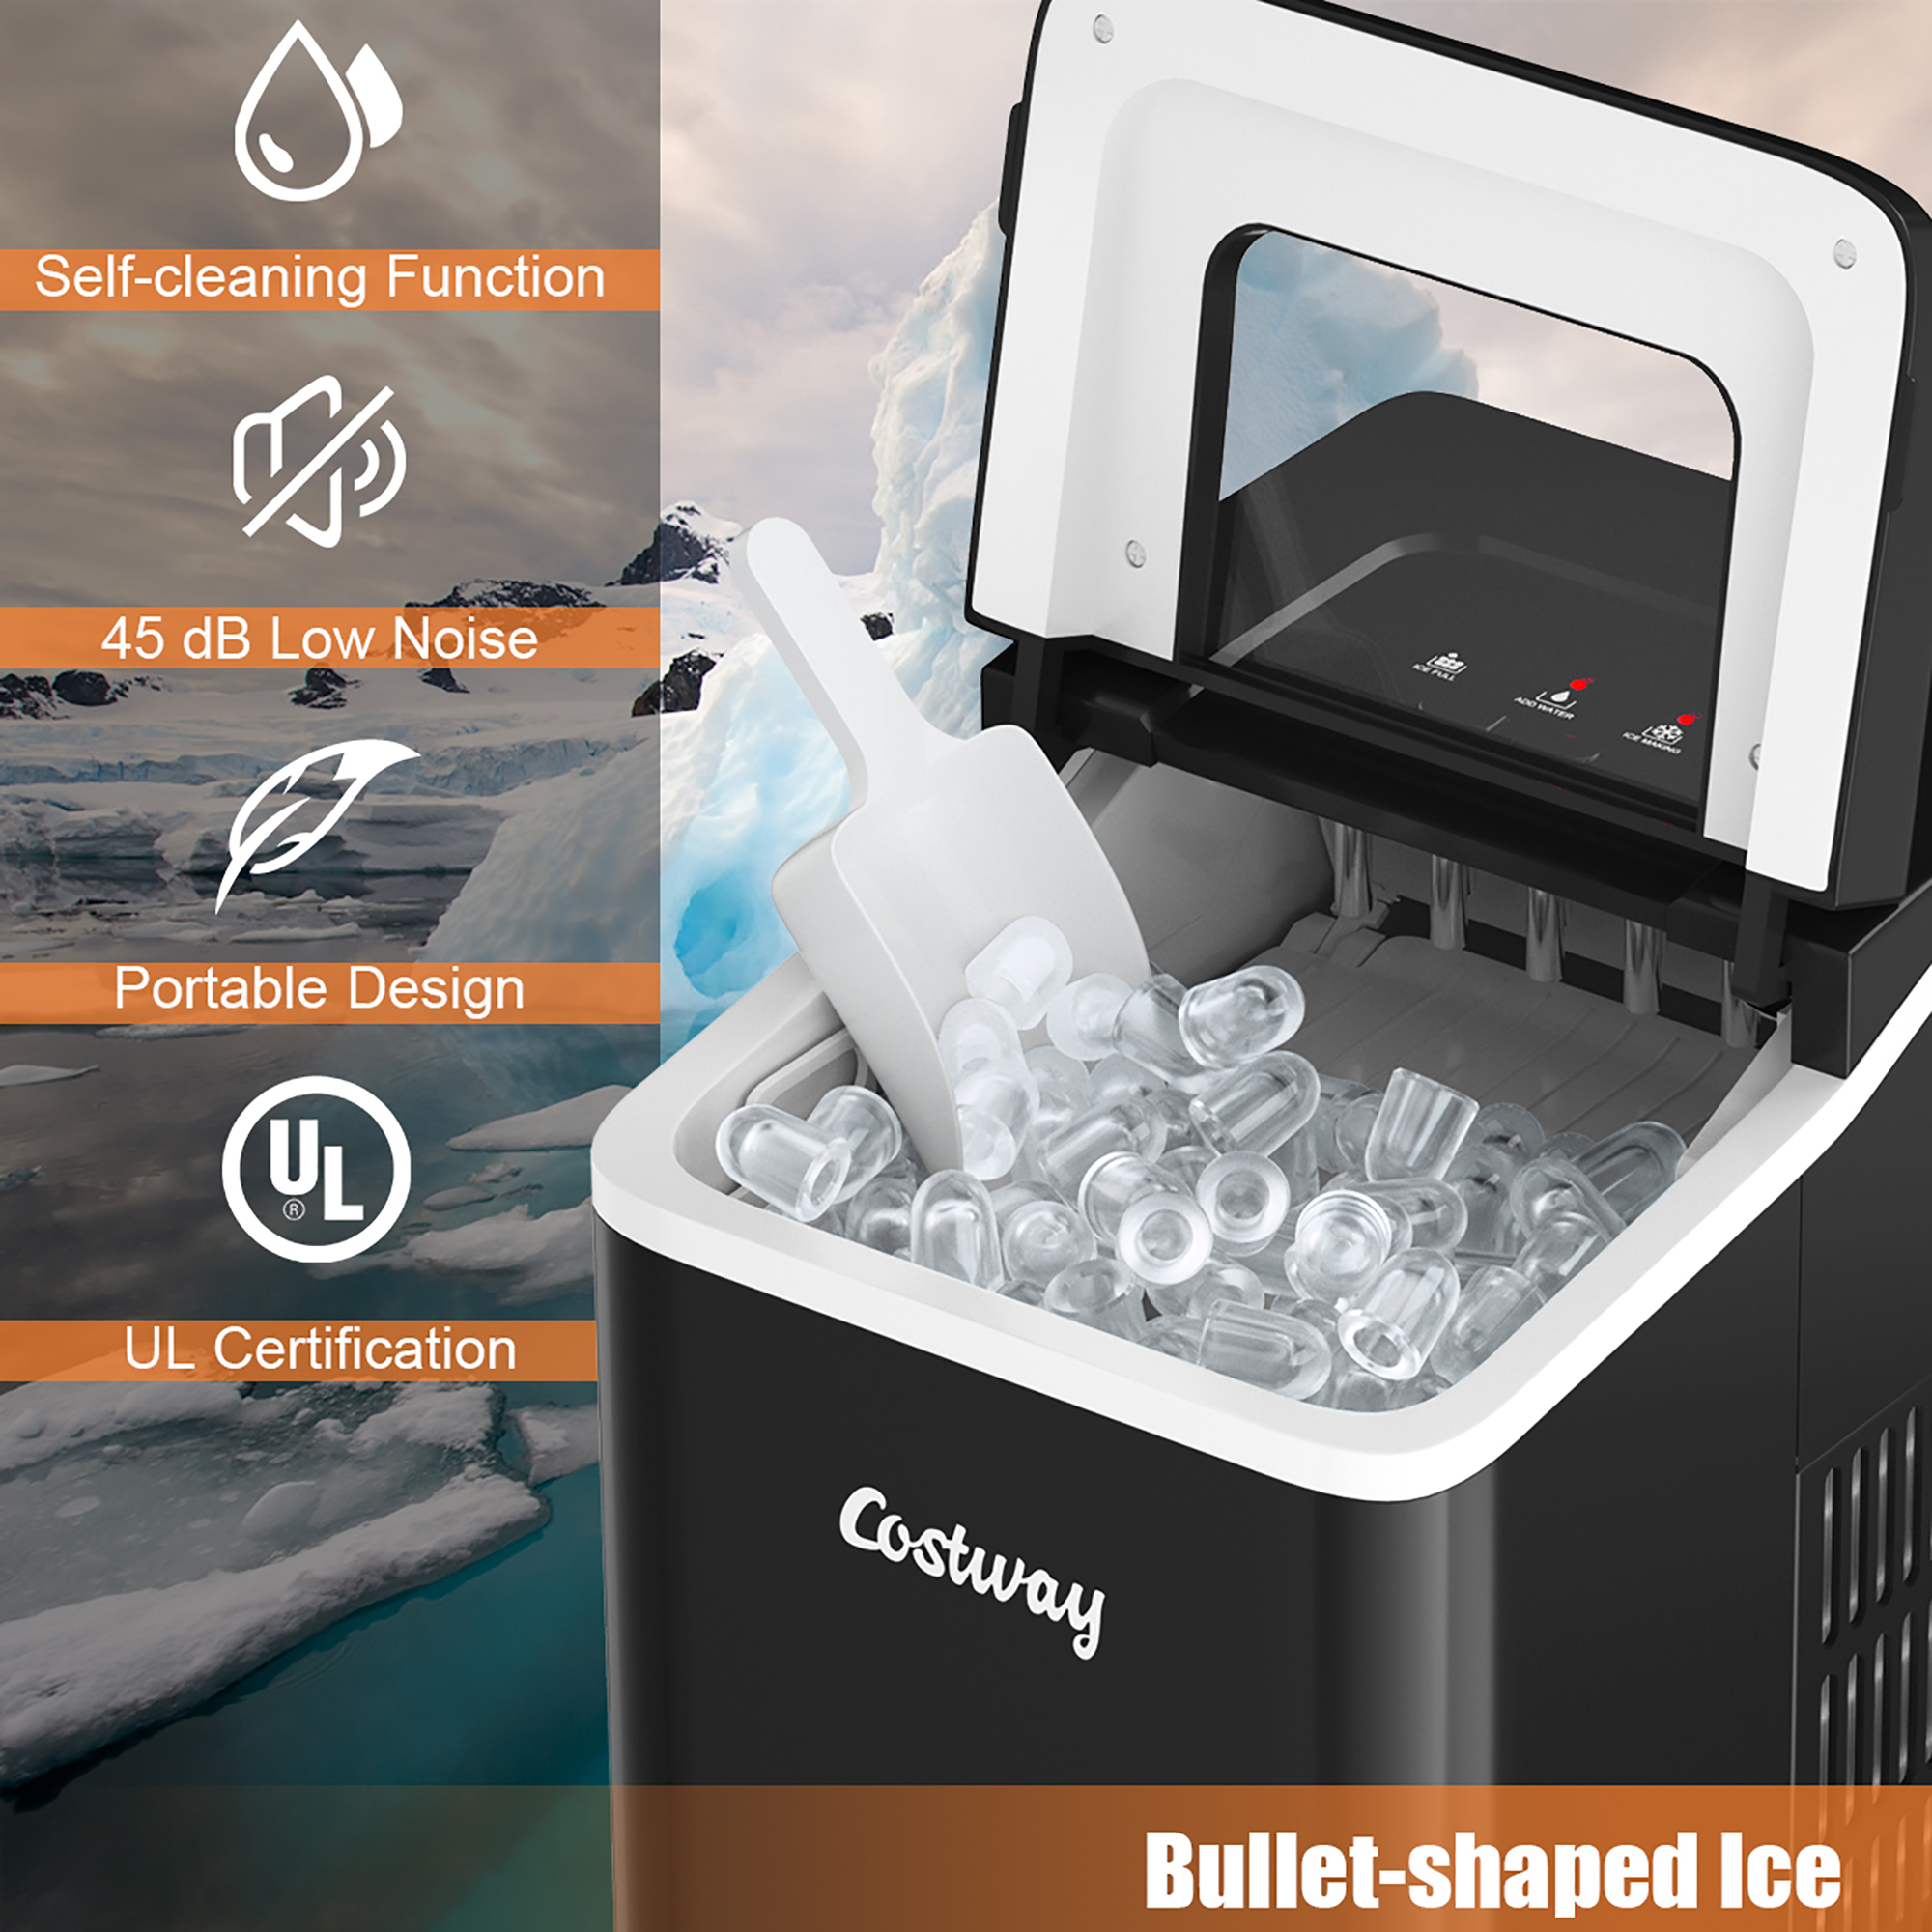 Costway Portable Ice Maker Machine Countertop 26Lbs/24H Self-cleaning w/ Scoop Black - image 3 of 10